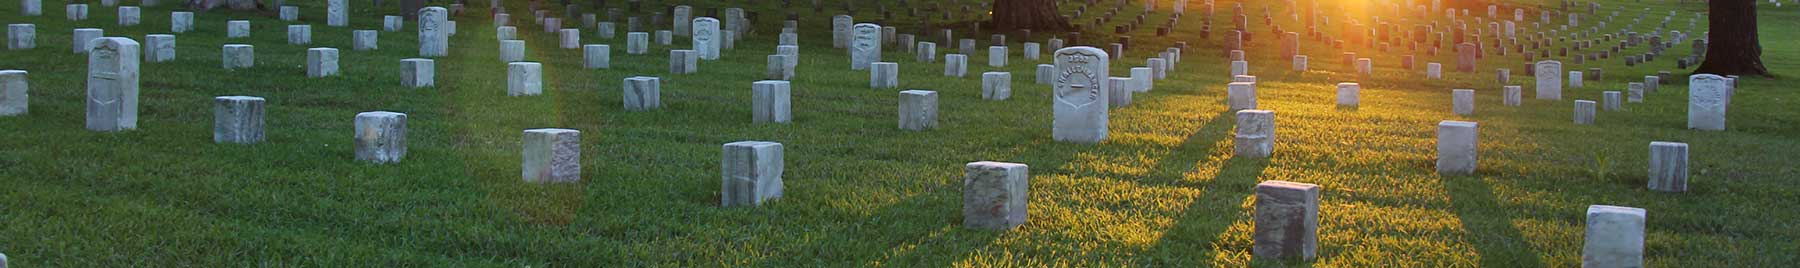 grave stones in Shiloh National Military Park